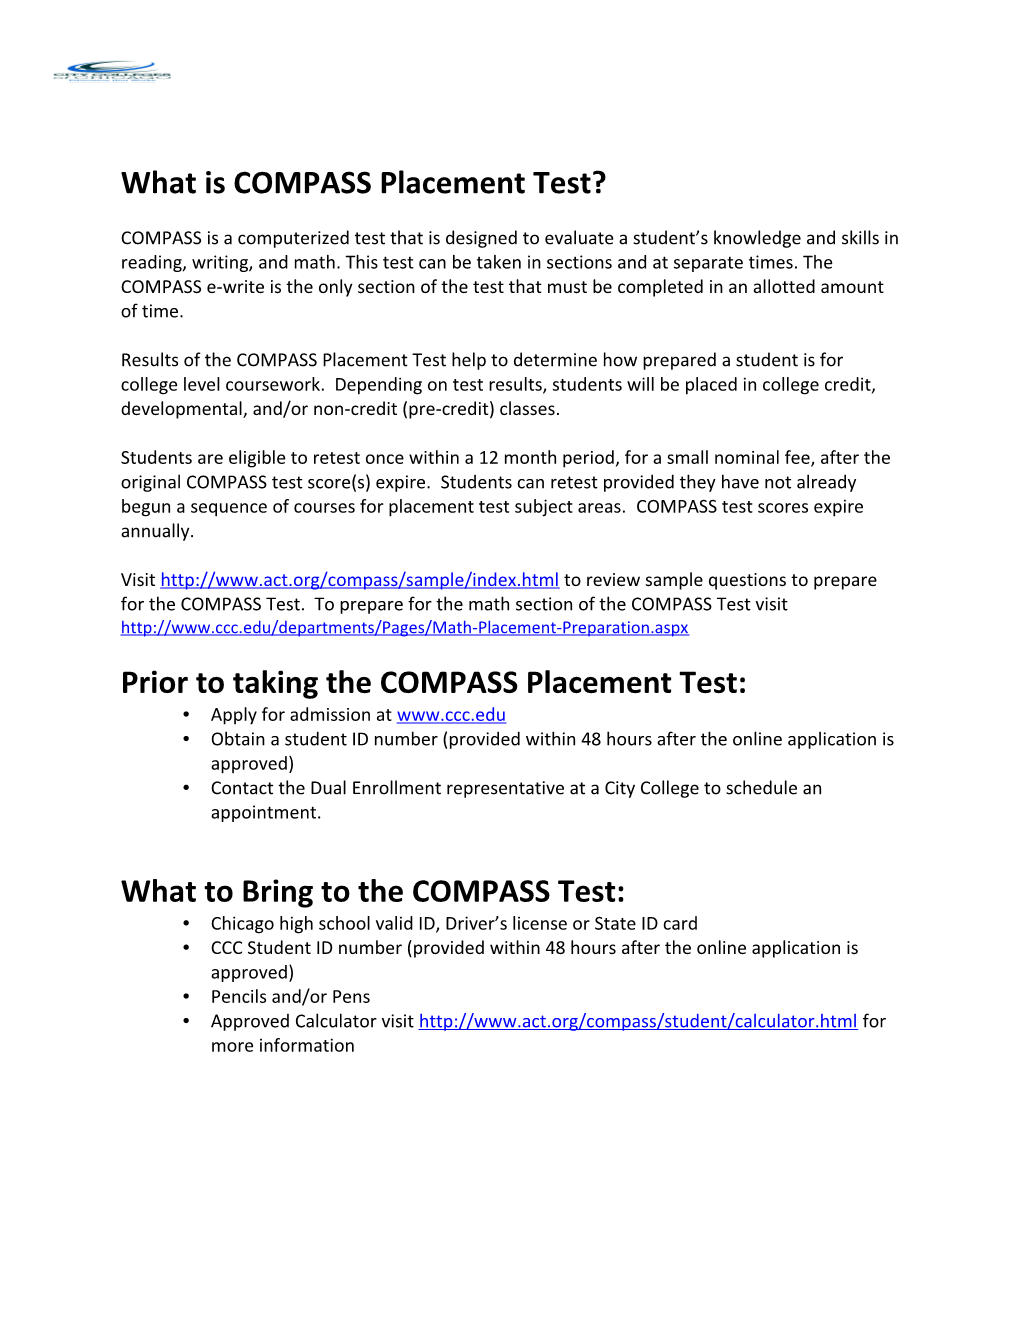 What Is COMPASS Placement Test?